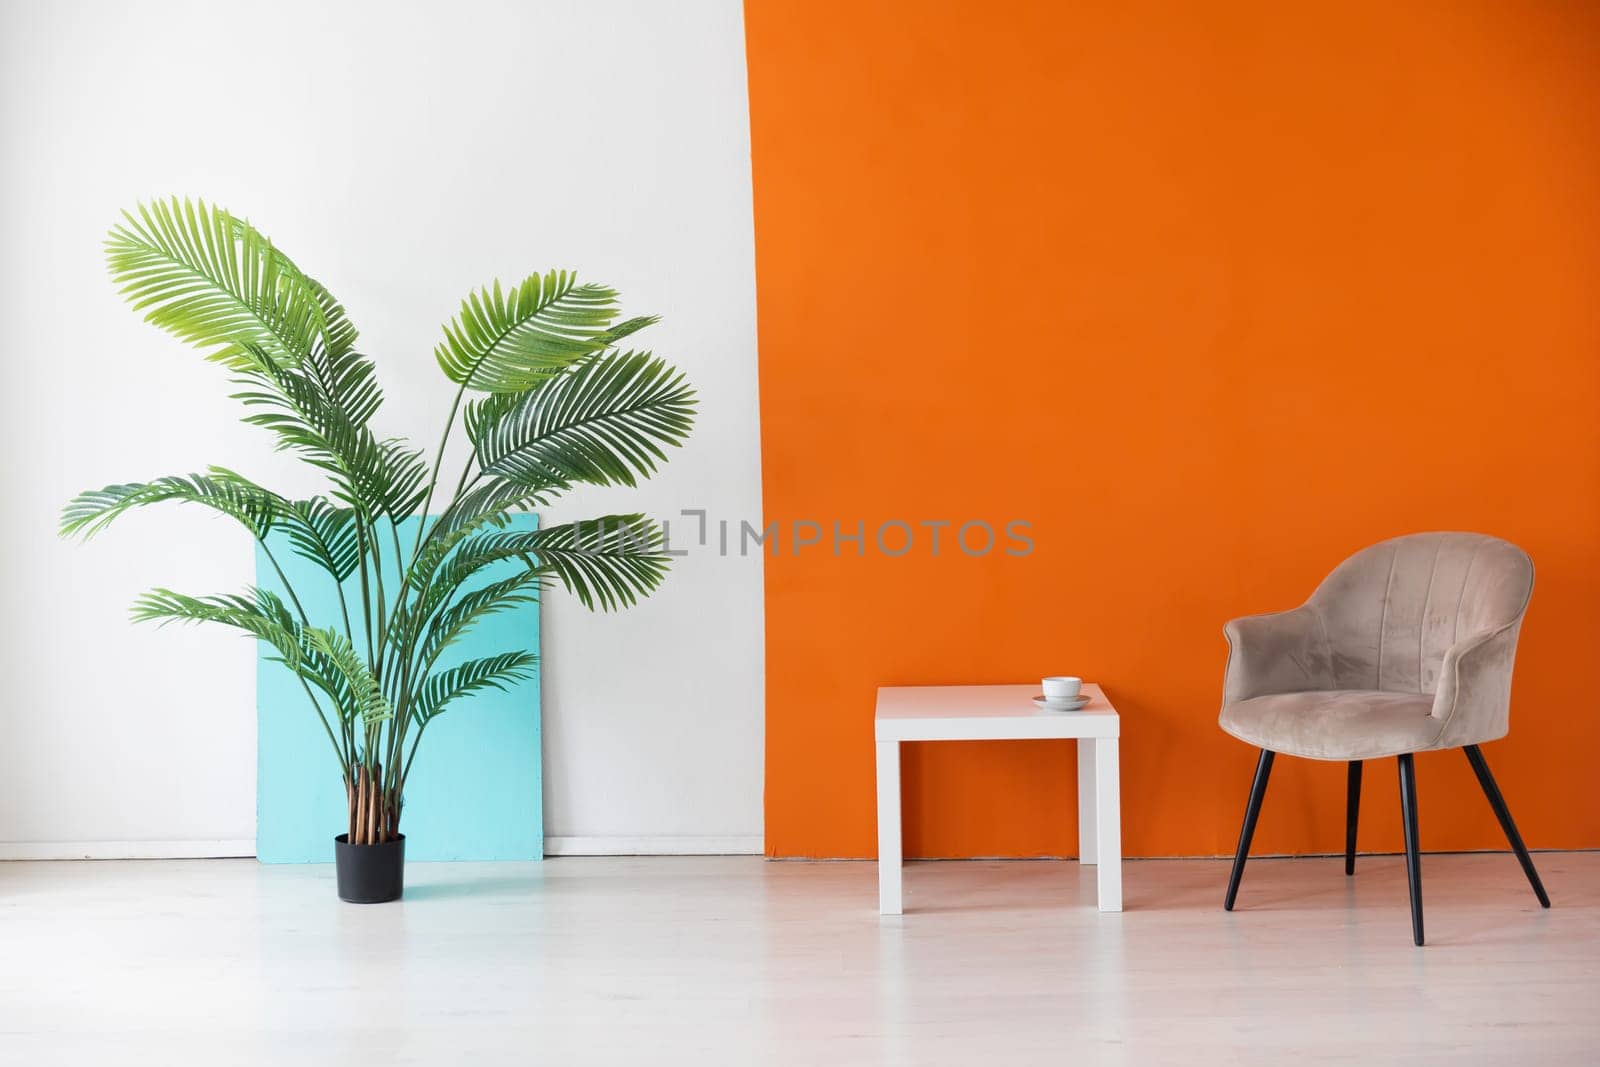 green plant in the interior of an empty white and orange room